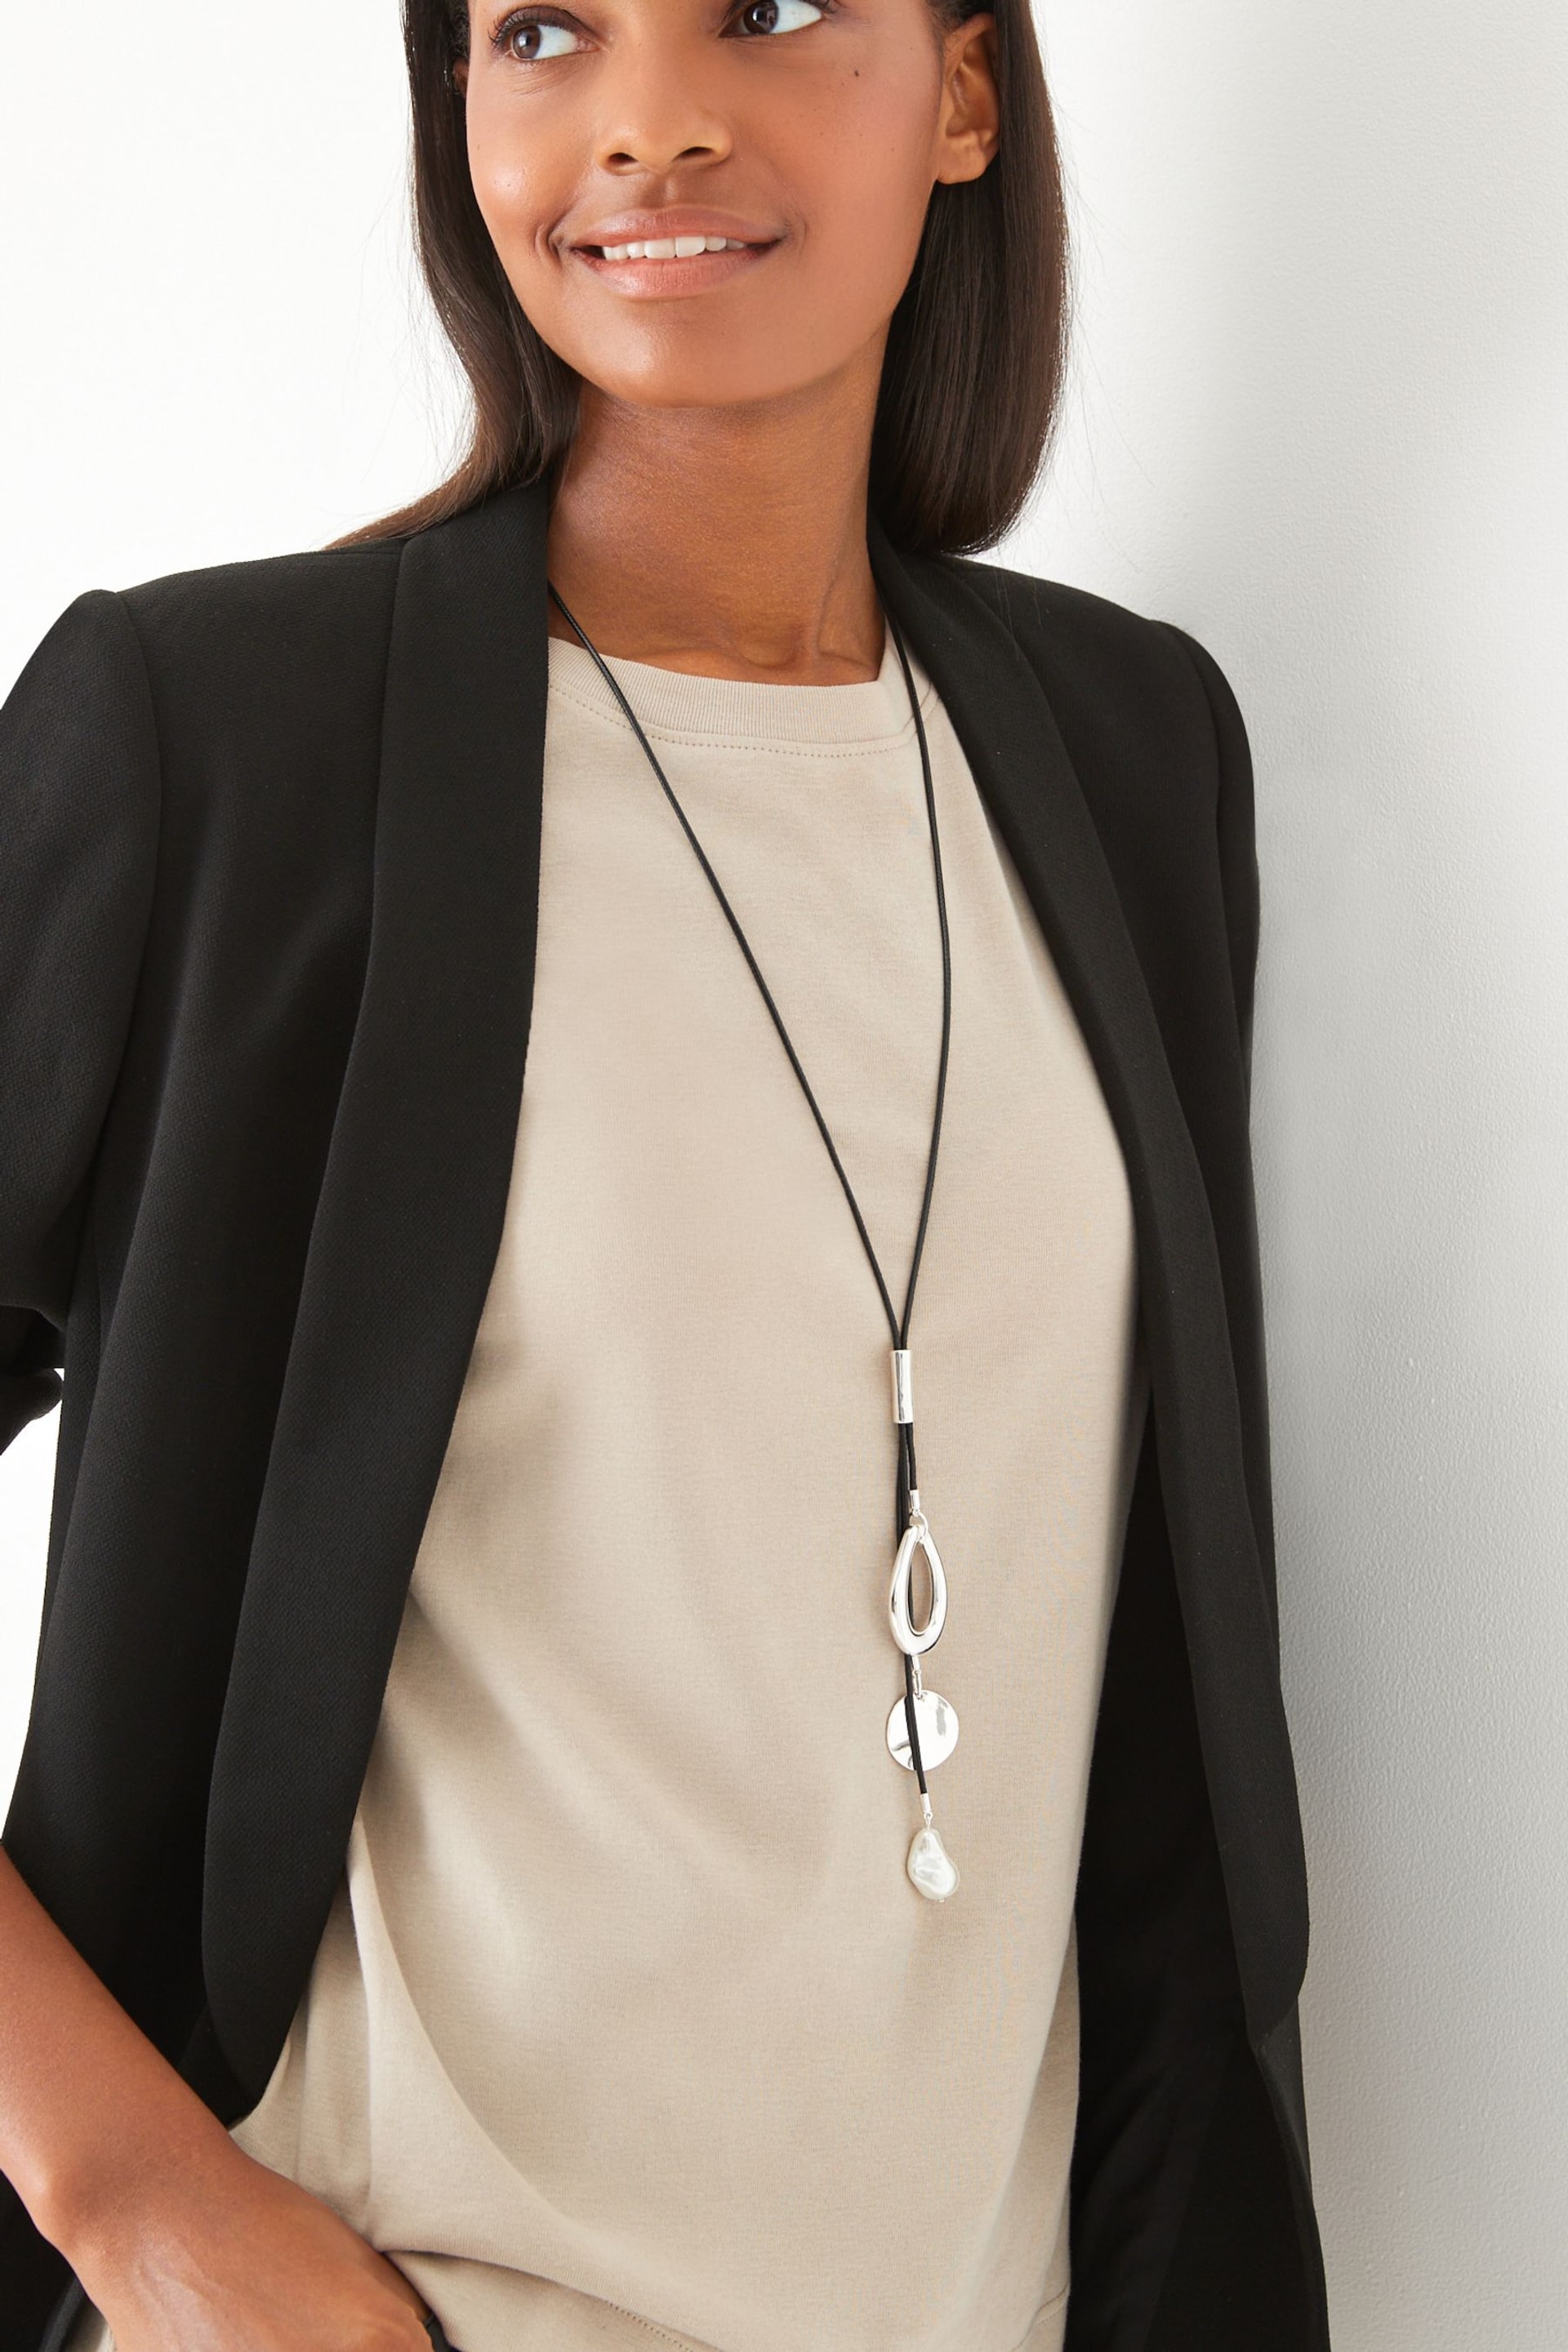 Black Cord Cluster Necklace - Image 1 of 4